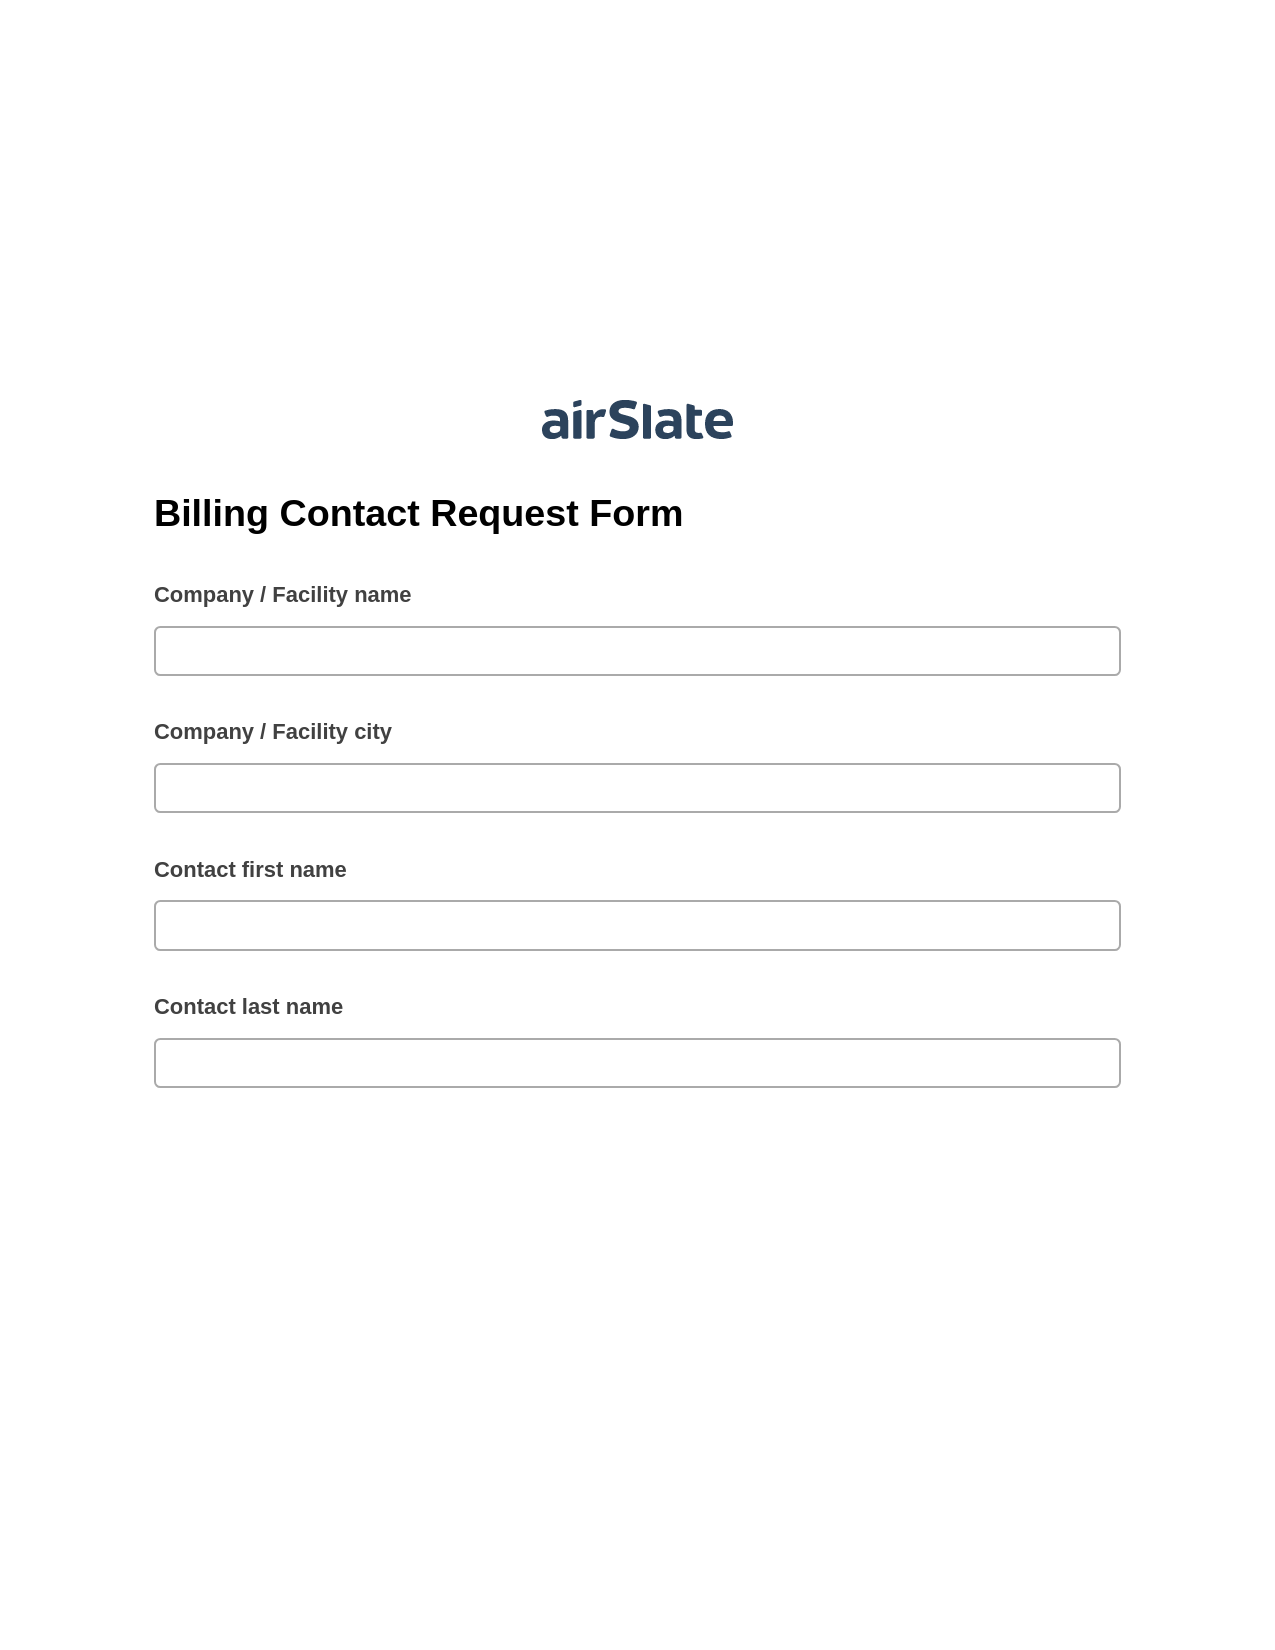 Multirole Billing Contact Request Form Pre-fill from NetSuite Records Bot, Assign Roles to Recipients Bot, Box Bot